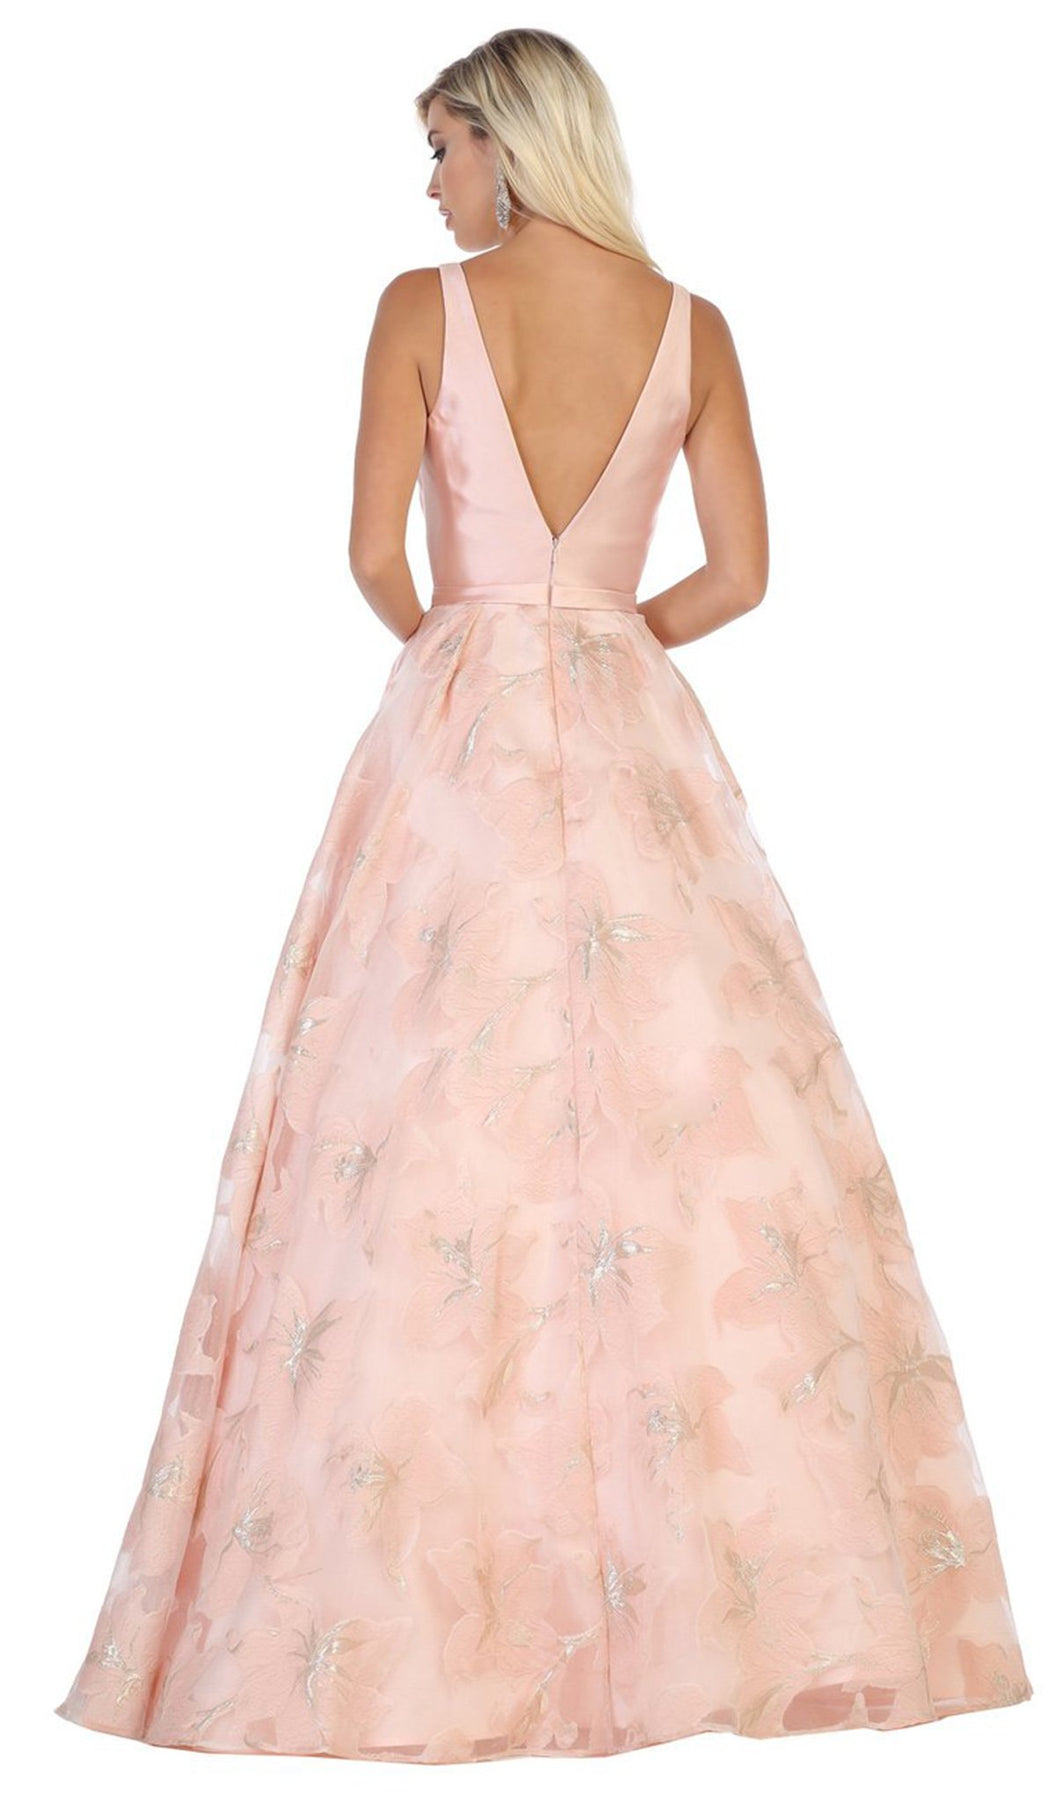 May Queen - RQ7730 Plunging V-Neck Floral Ballgown In Pink